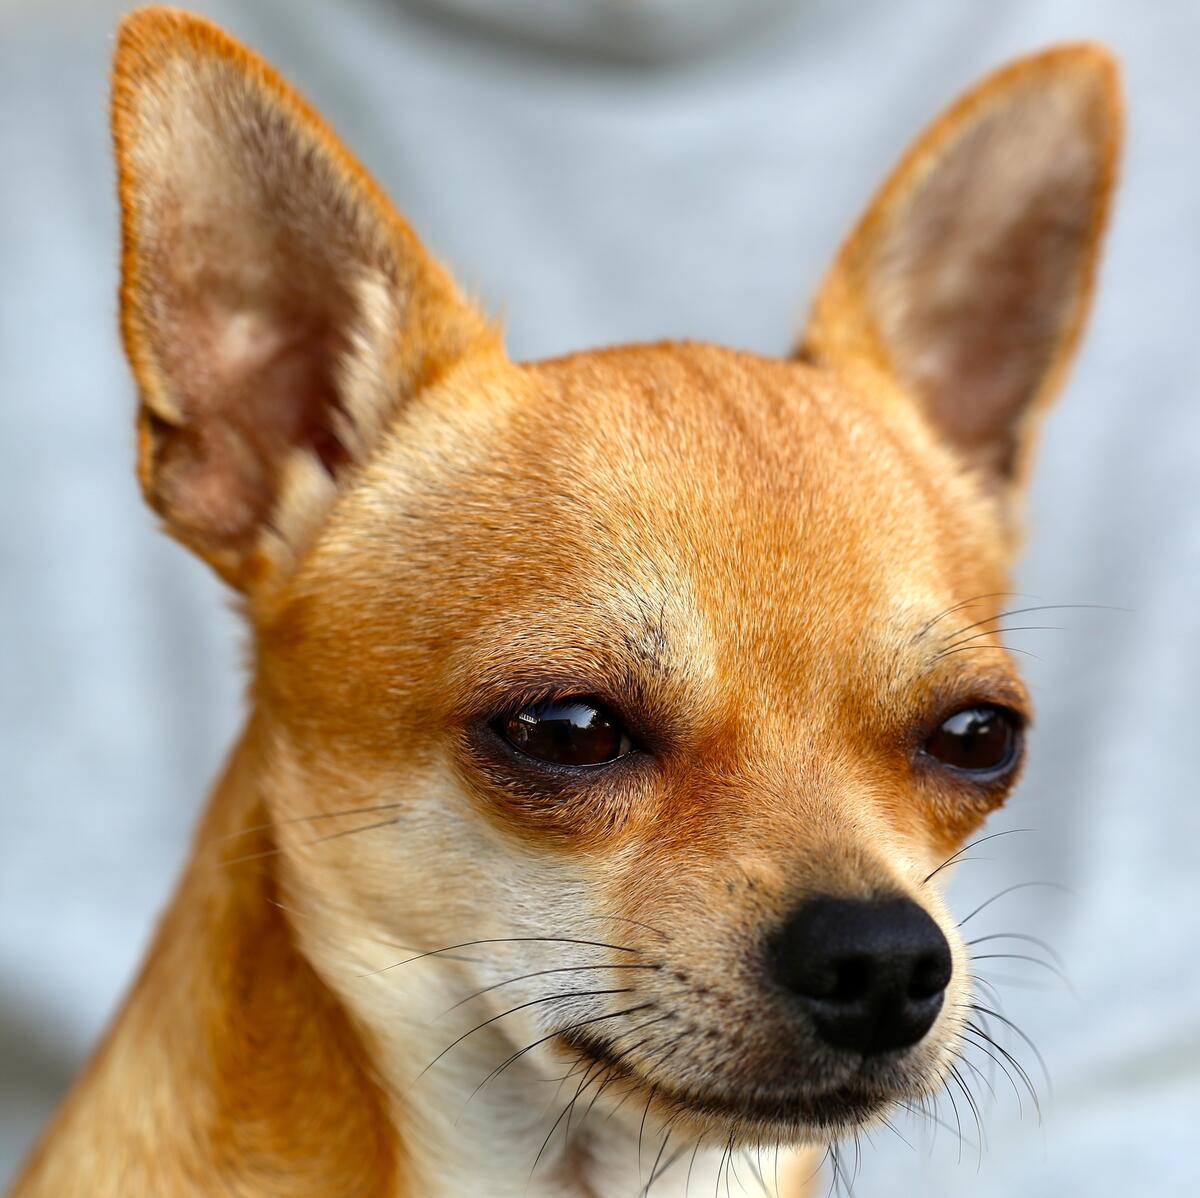 The Chihuahua looks off into the distance